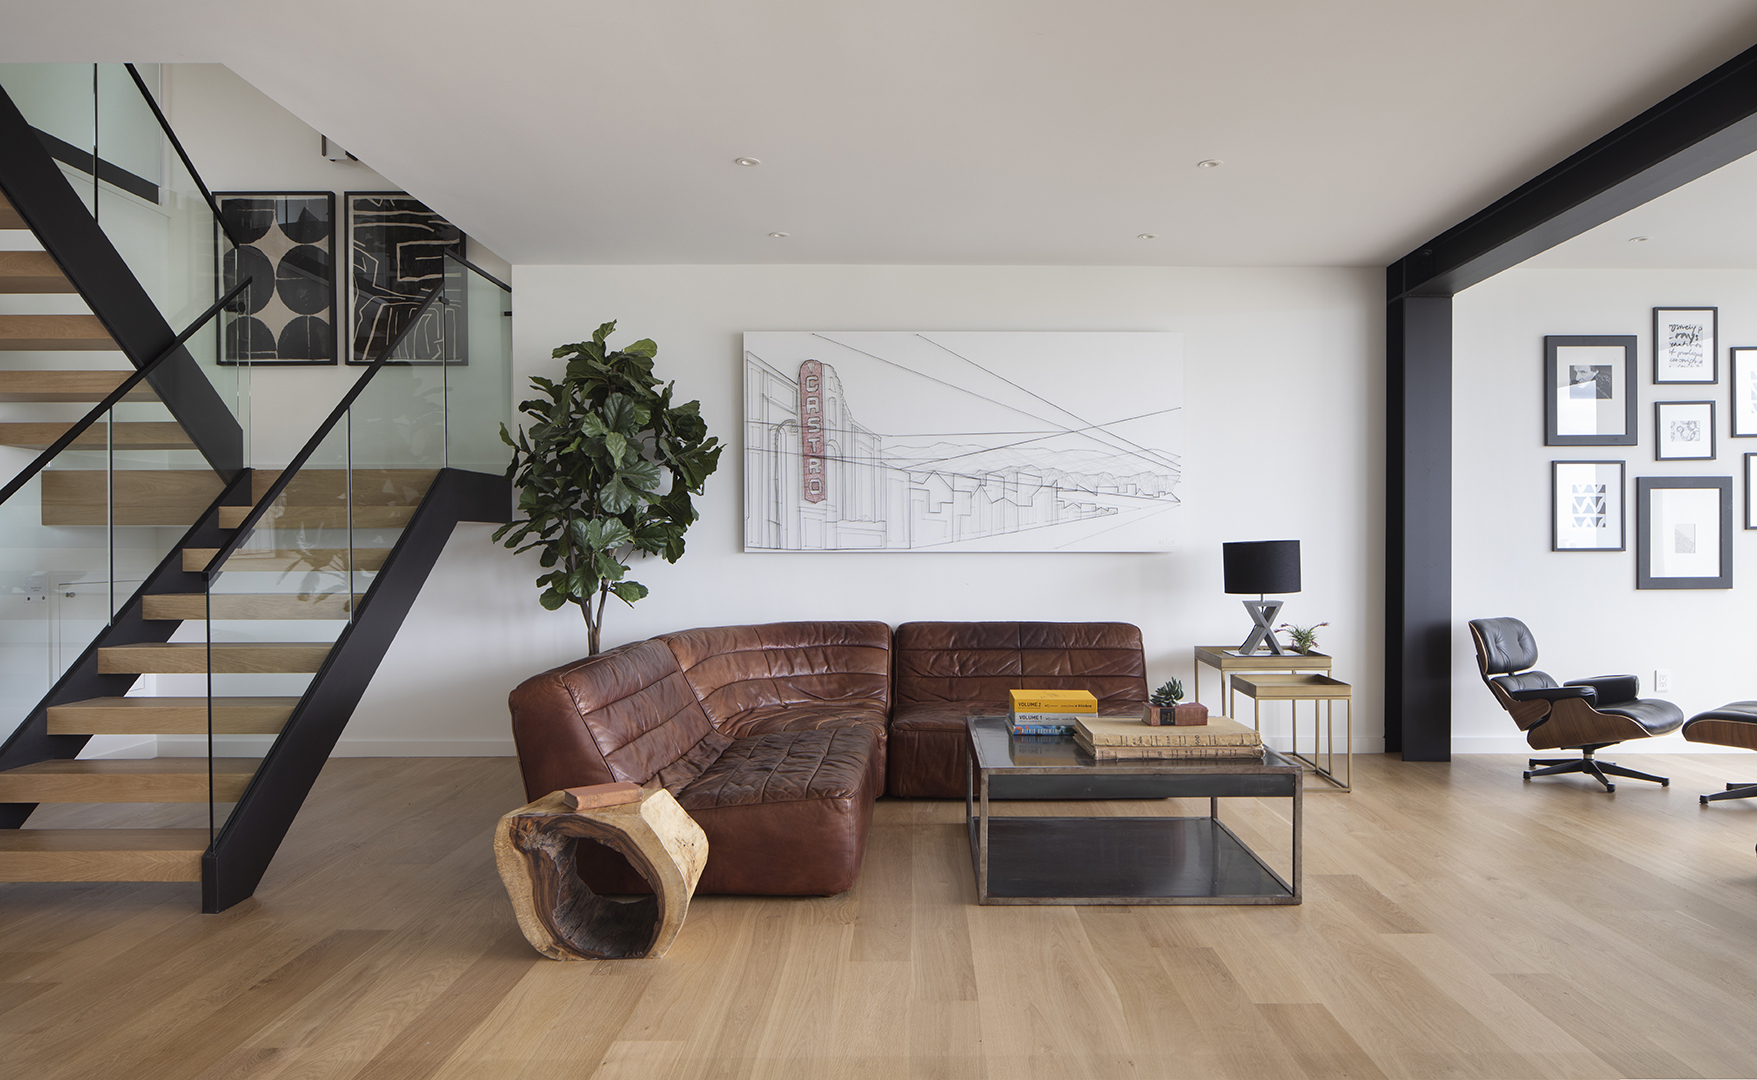 19th Street House in San Francisco, CA by John Lum Architecture